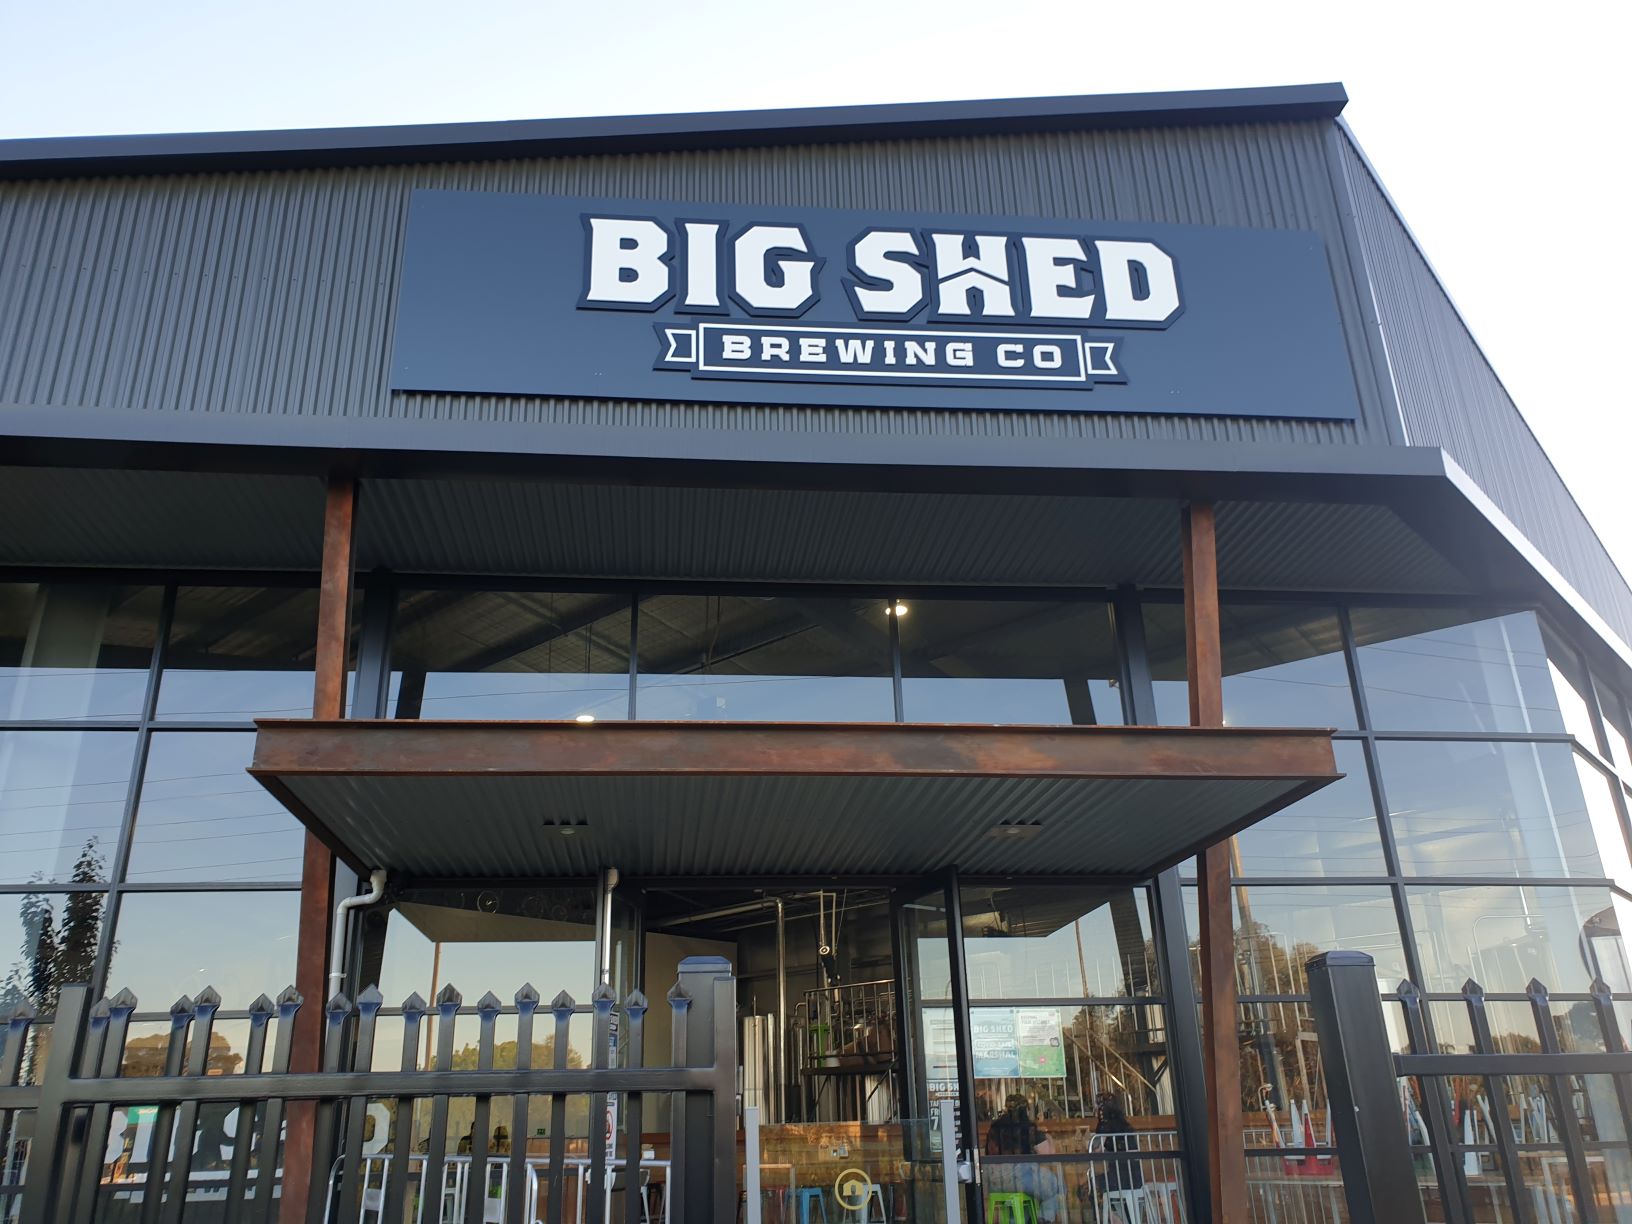 Big Shed Brewing Concern - New Venue! - CORY LOVES BEER